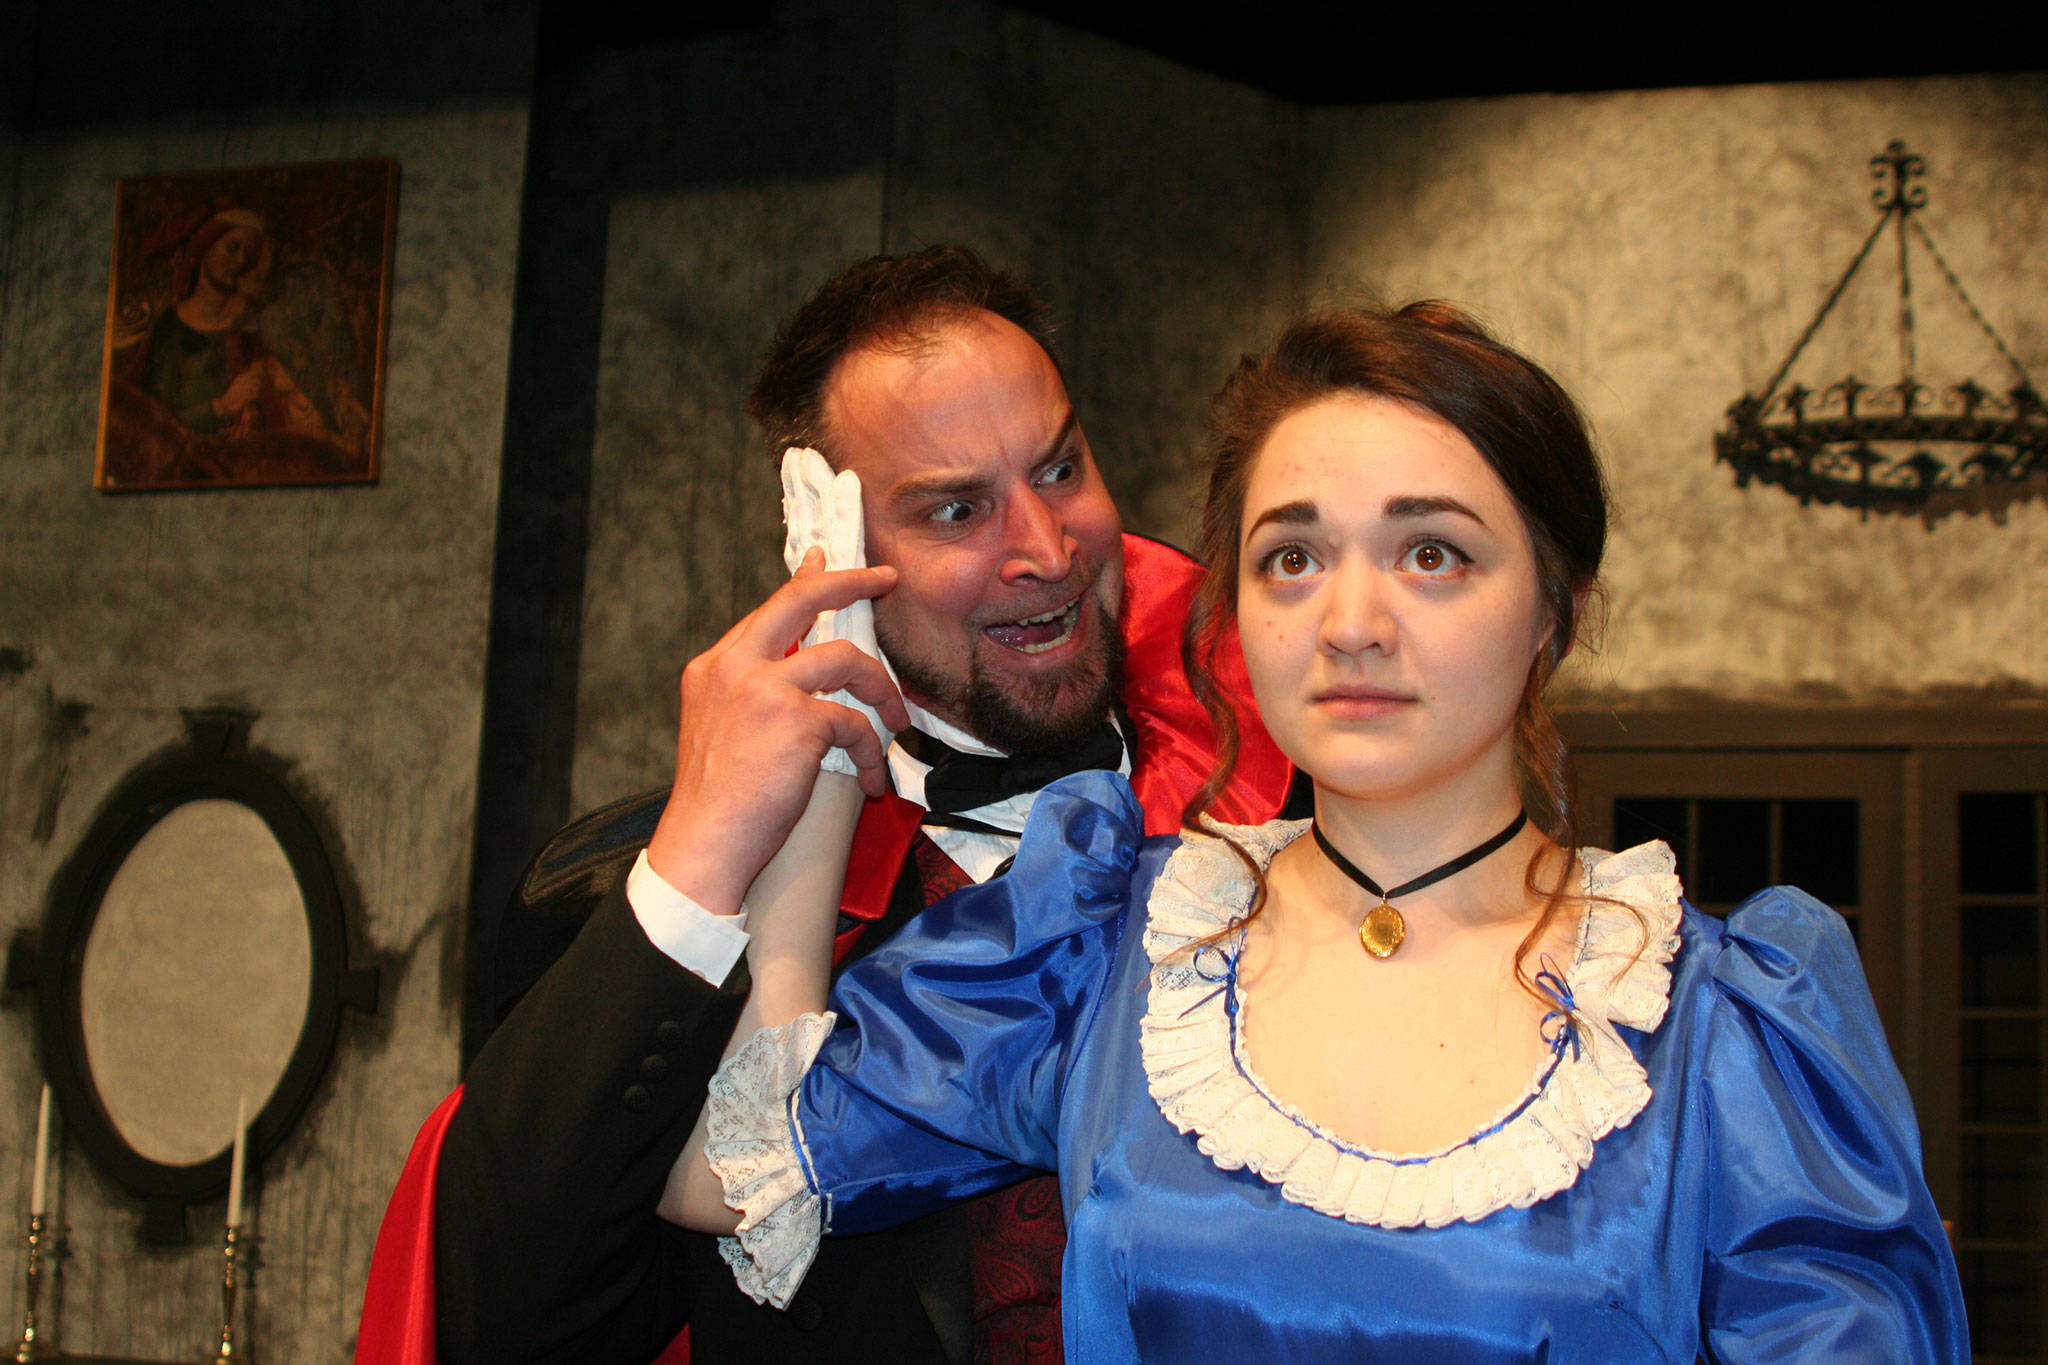 Jeremy Pederson stars as Count Dracula with Luci Barrera as Mina Seward in “Dracula: The Musical?” for three weeks starting April 28, at the Port Angeles Community Playhouse. Photo by Kate Carter